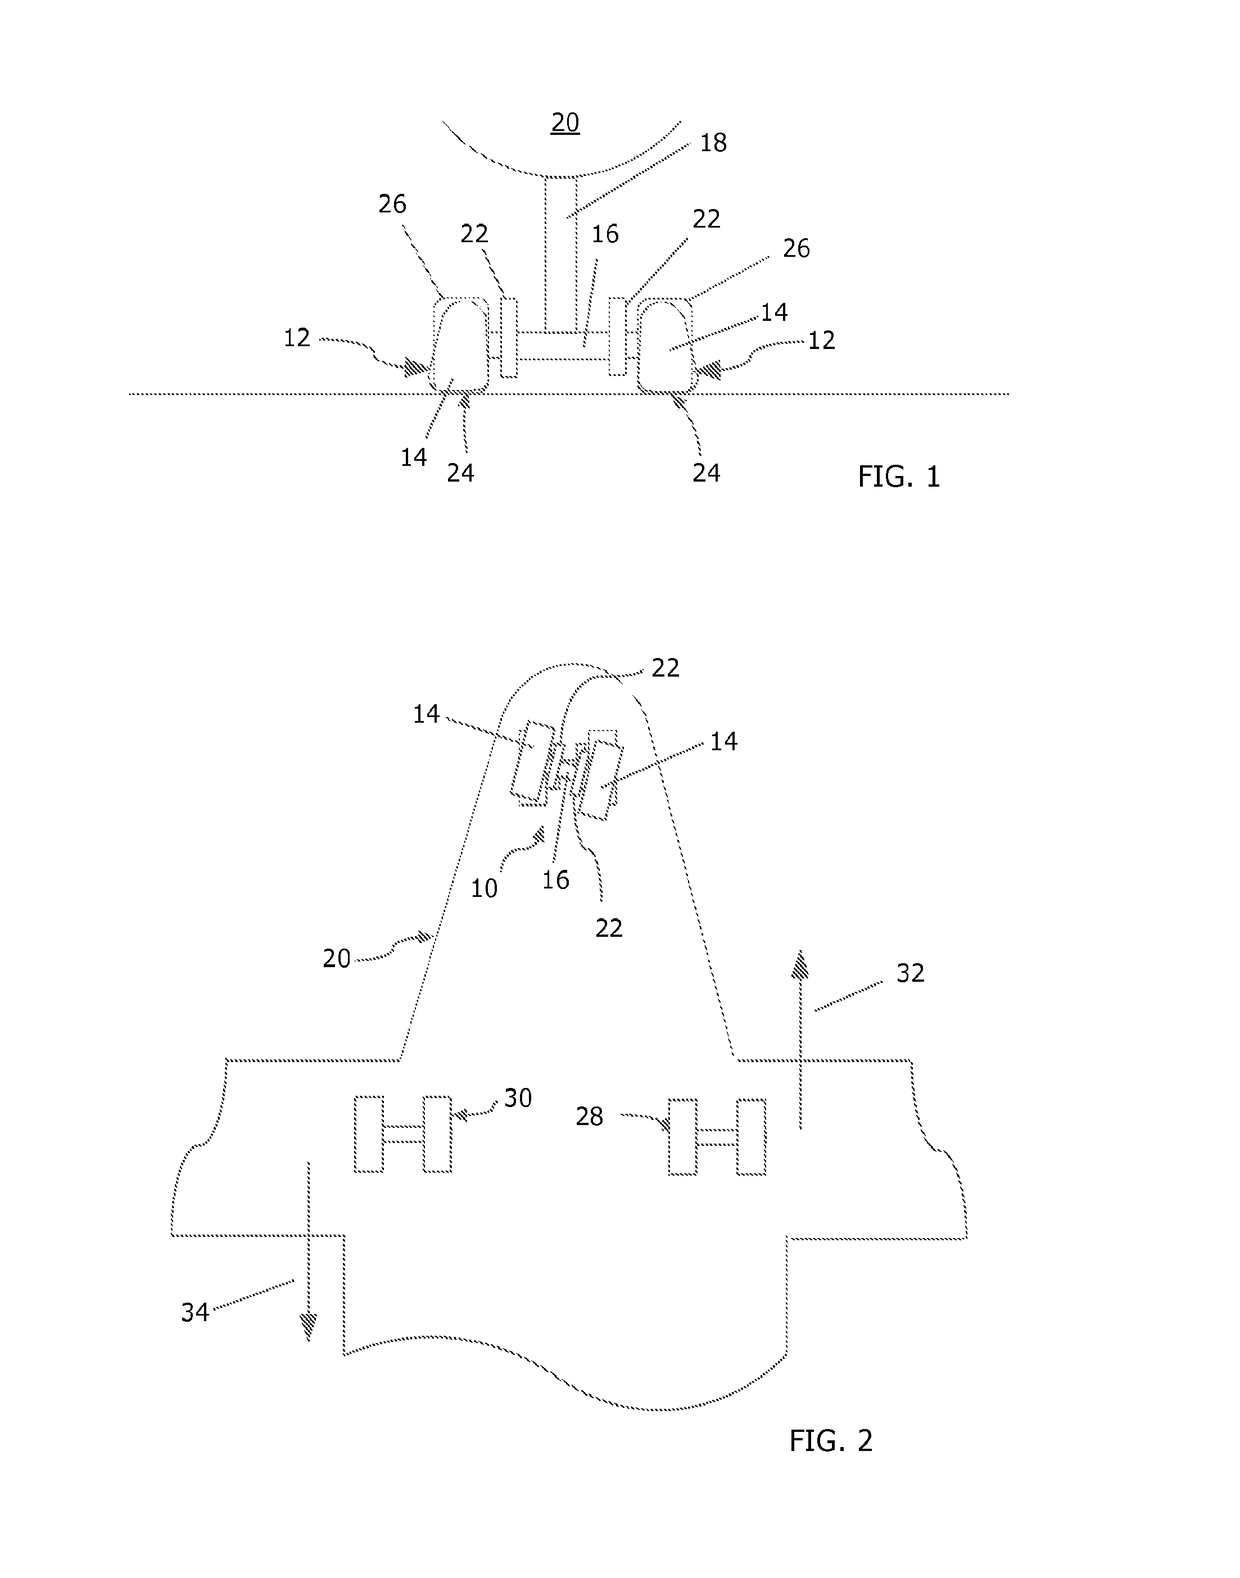 Method of operating aircraft drive to move an aircraft under adverse ground conditions